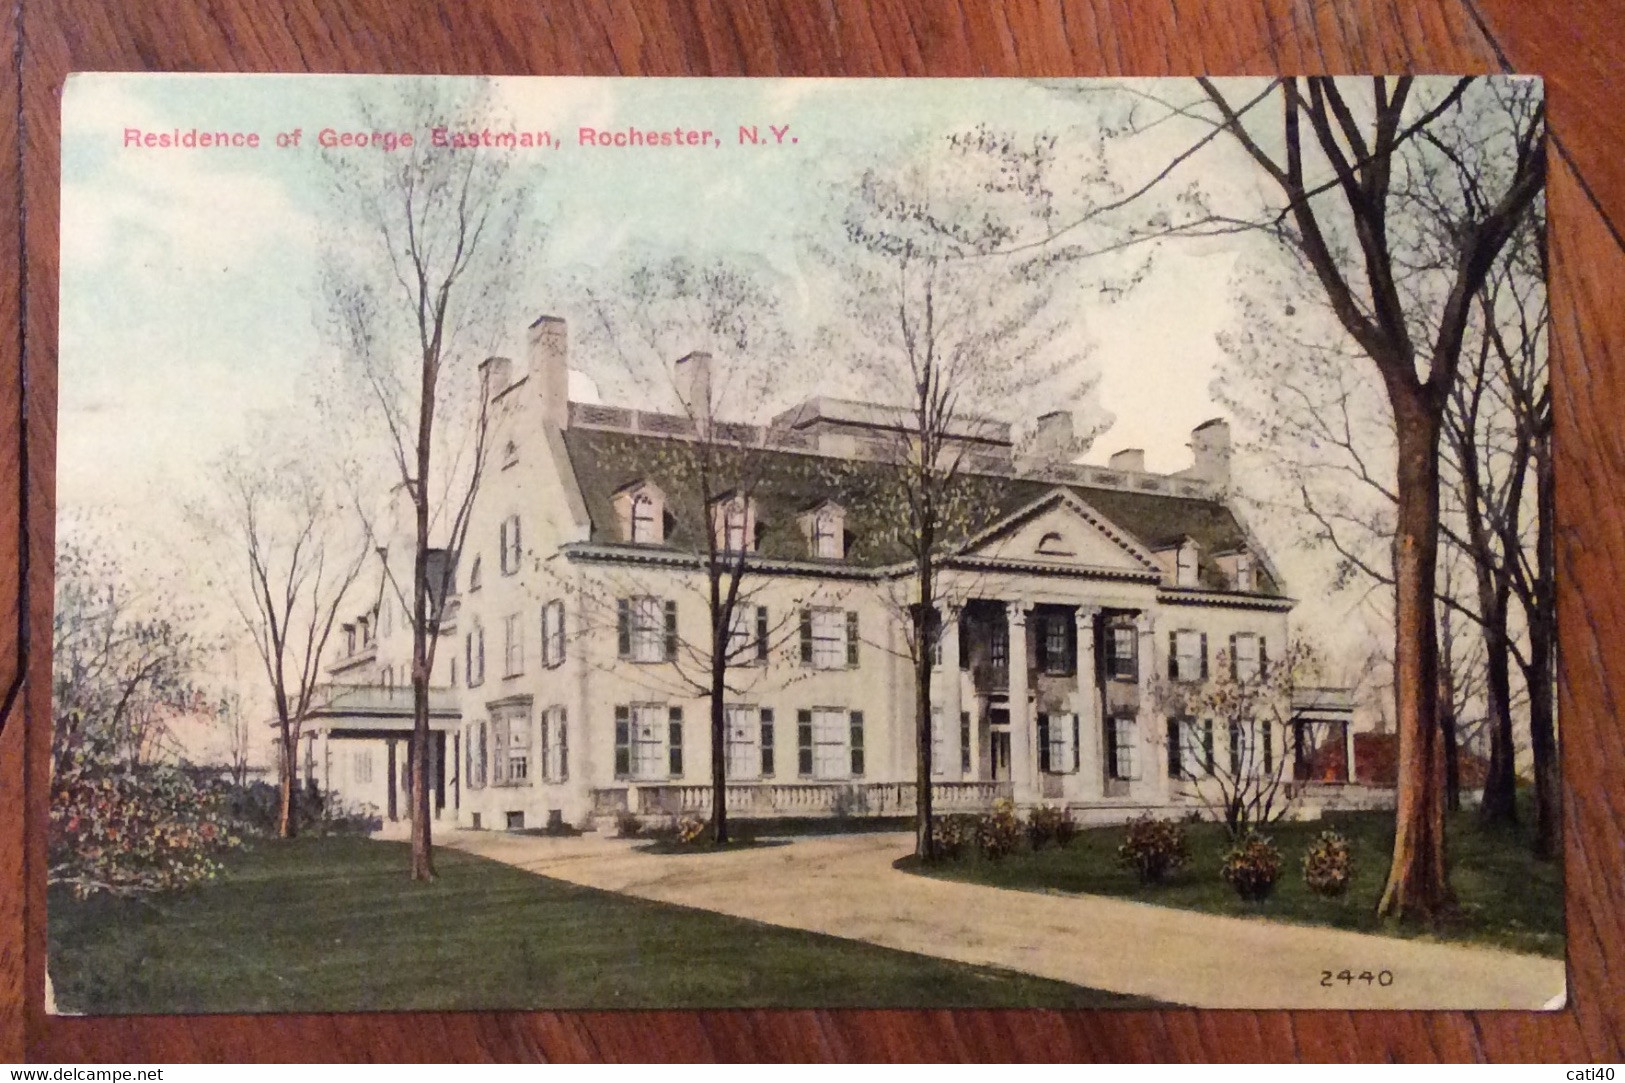 USA - ROCHESTER , RESIDENCE OF GEORGE EASTMAN  - VINTAGE POST CARD FROM LYONS OCT 6 1913 TO N.Y. - Fall River